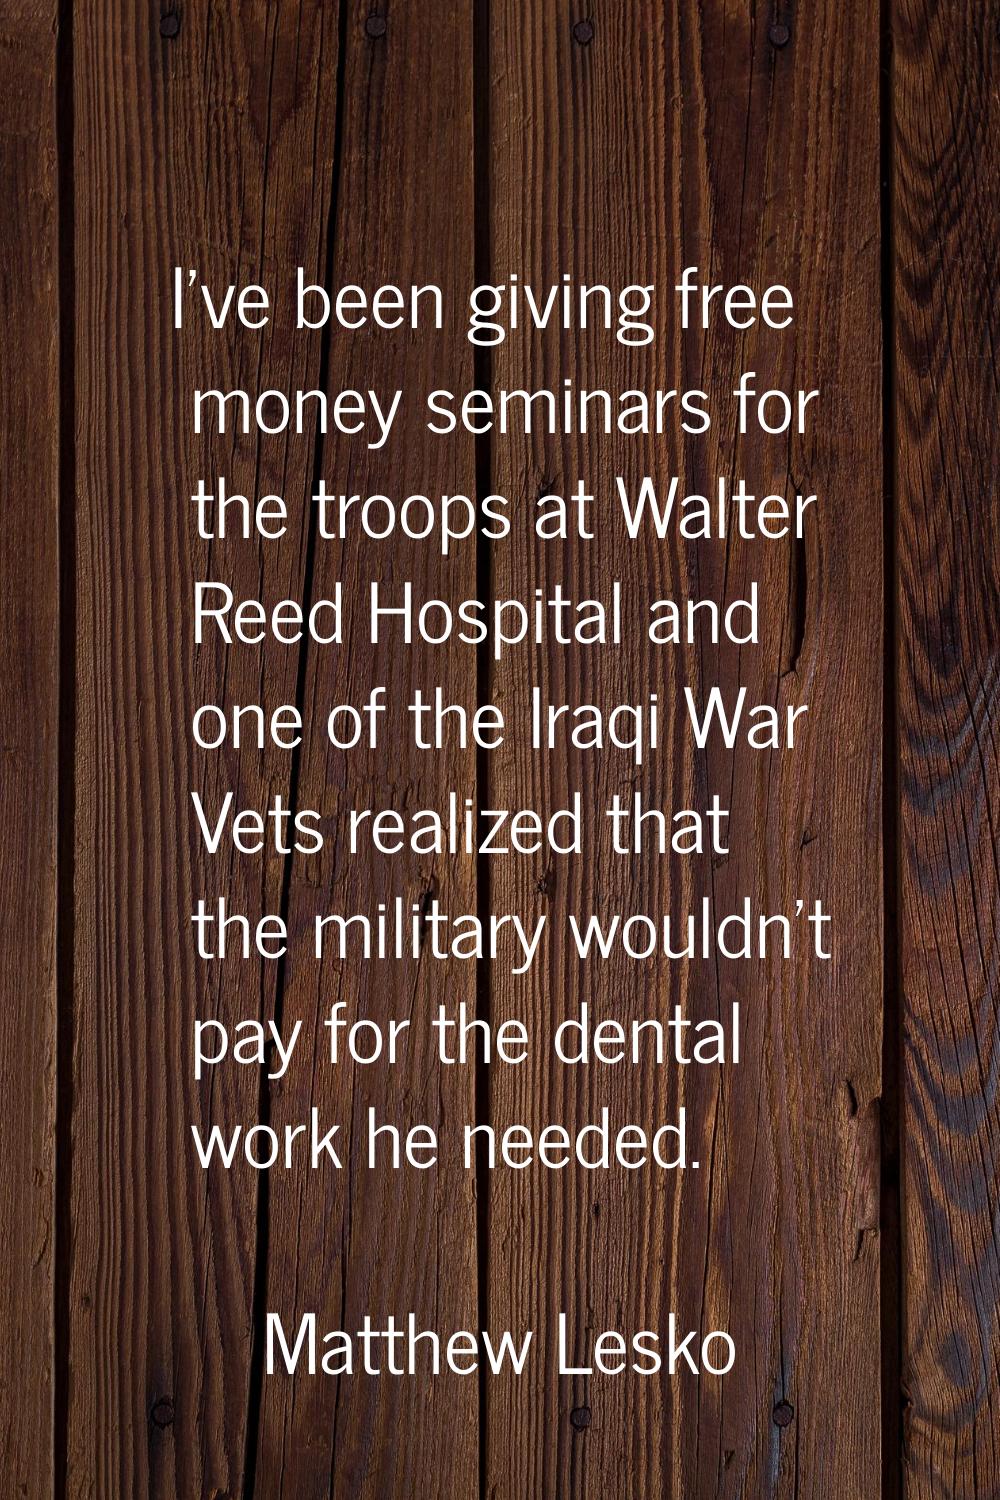 I've been giving free money seminars for the troops at Walter Reed Hospital and one of the Iraqi Wa